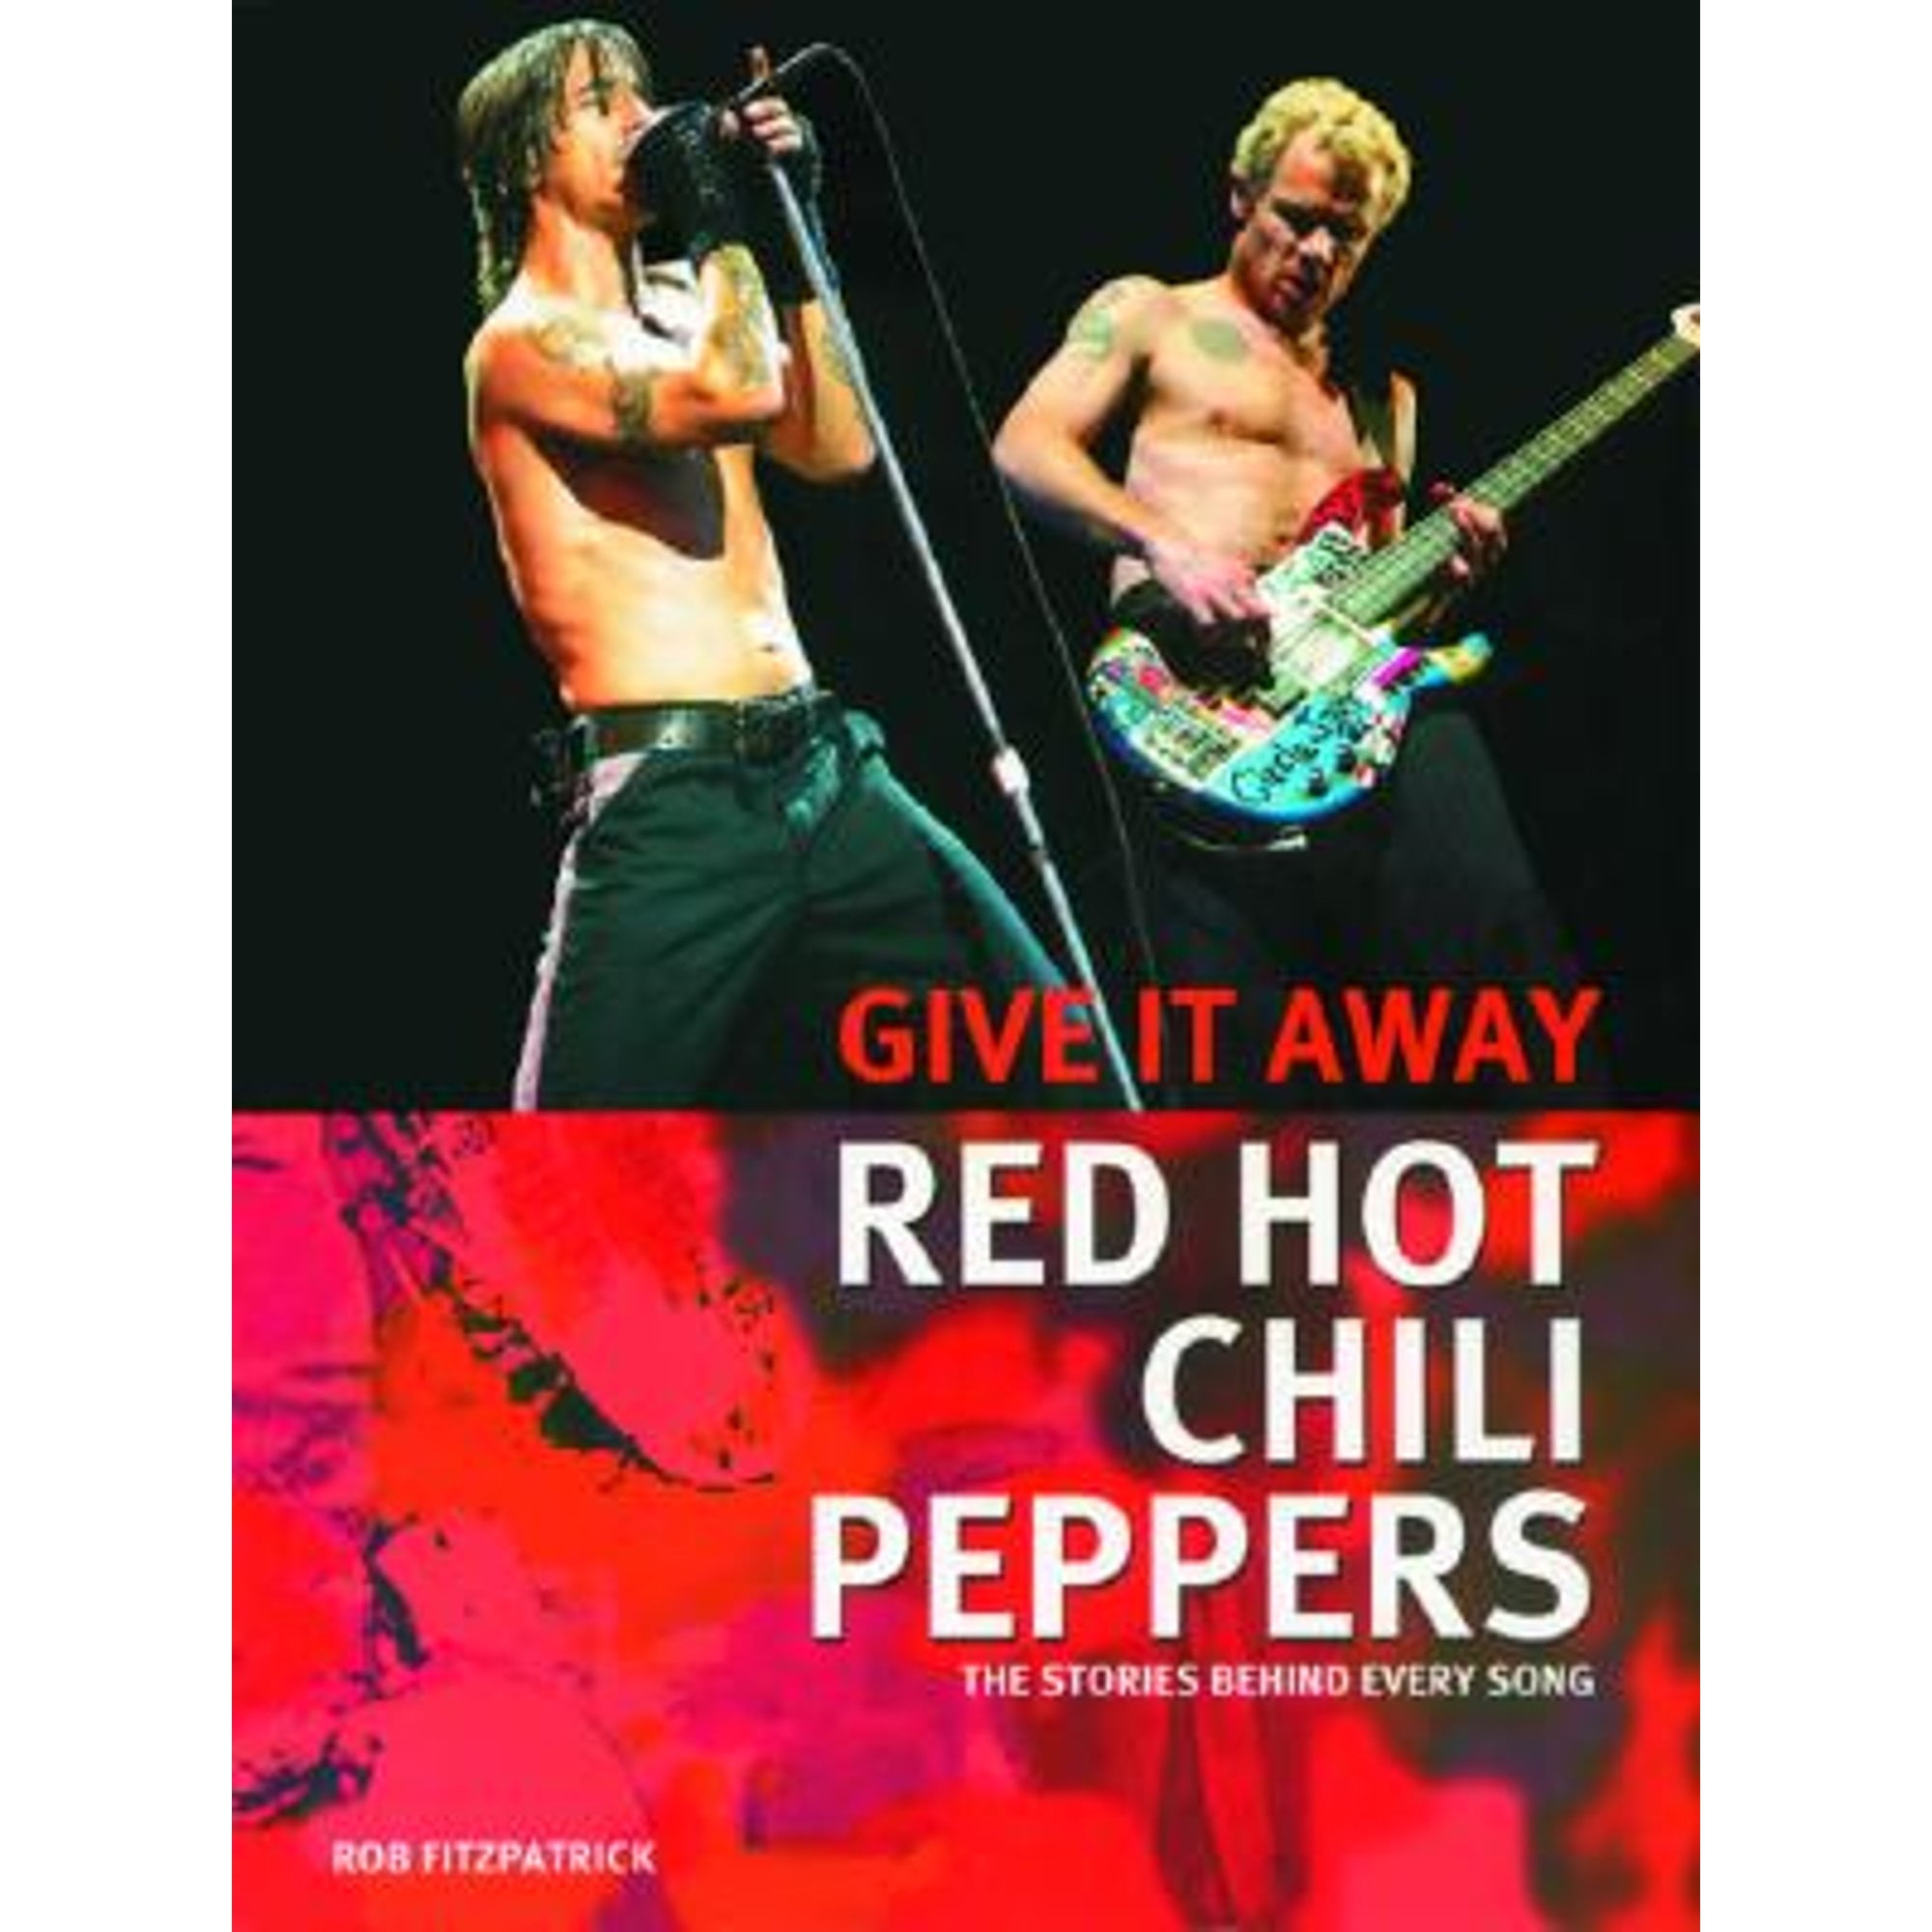 Red hot chili peppers give it away. Red hot Chili Peppers обложка. Роб Фитцпатрик. RHCP give it away.